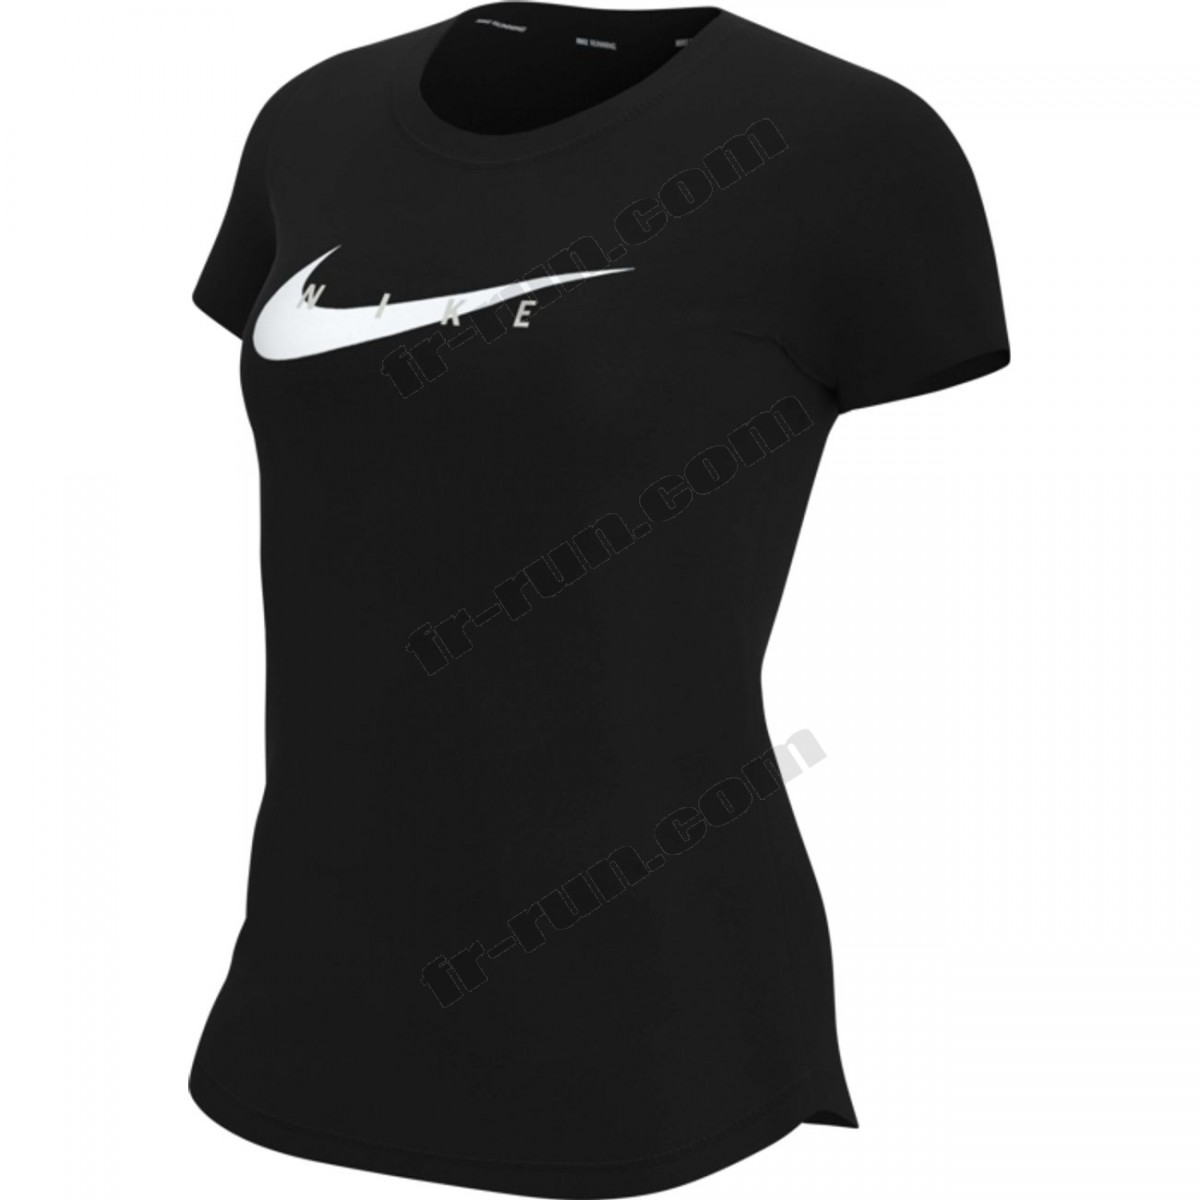 Nike/TOP running femme NIKE SWOOSH SS √ Nouveau style √ Soldes - -0